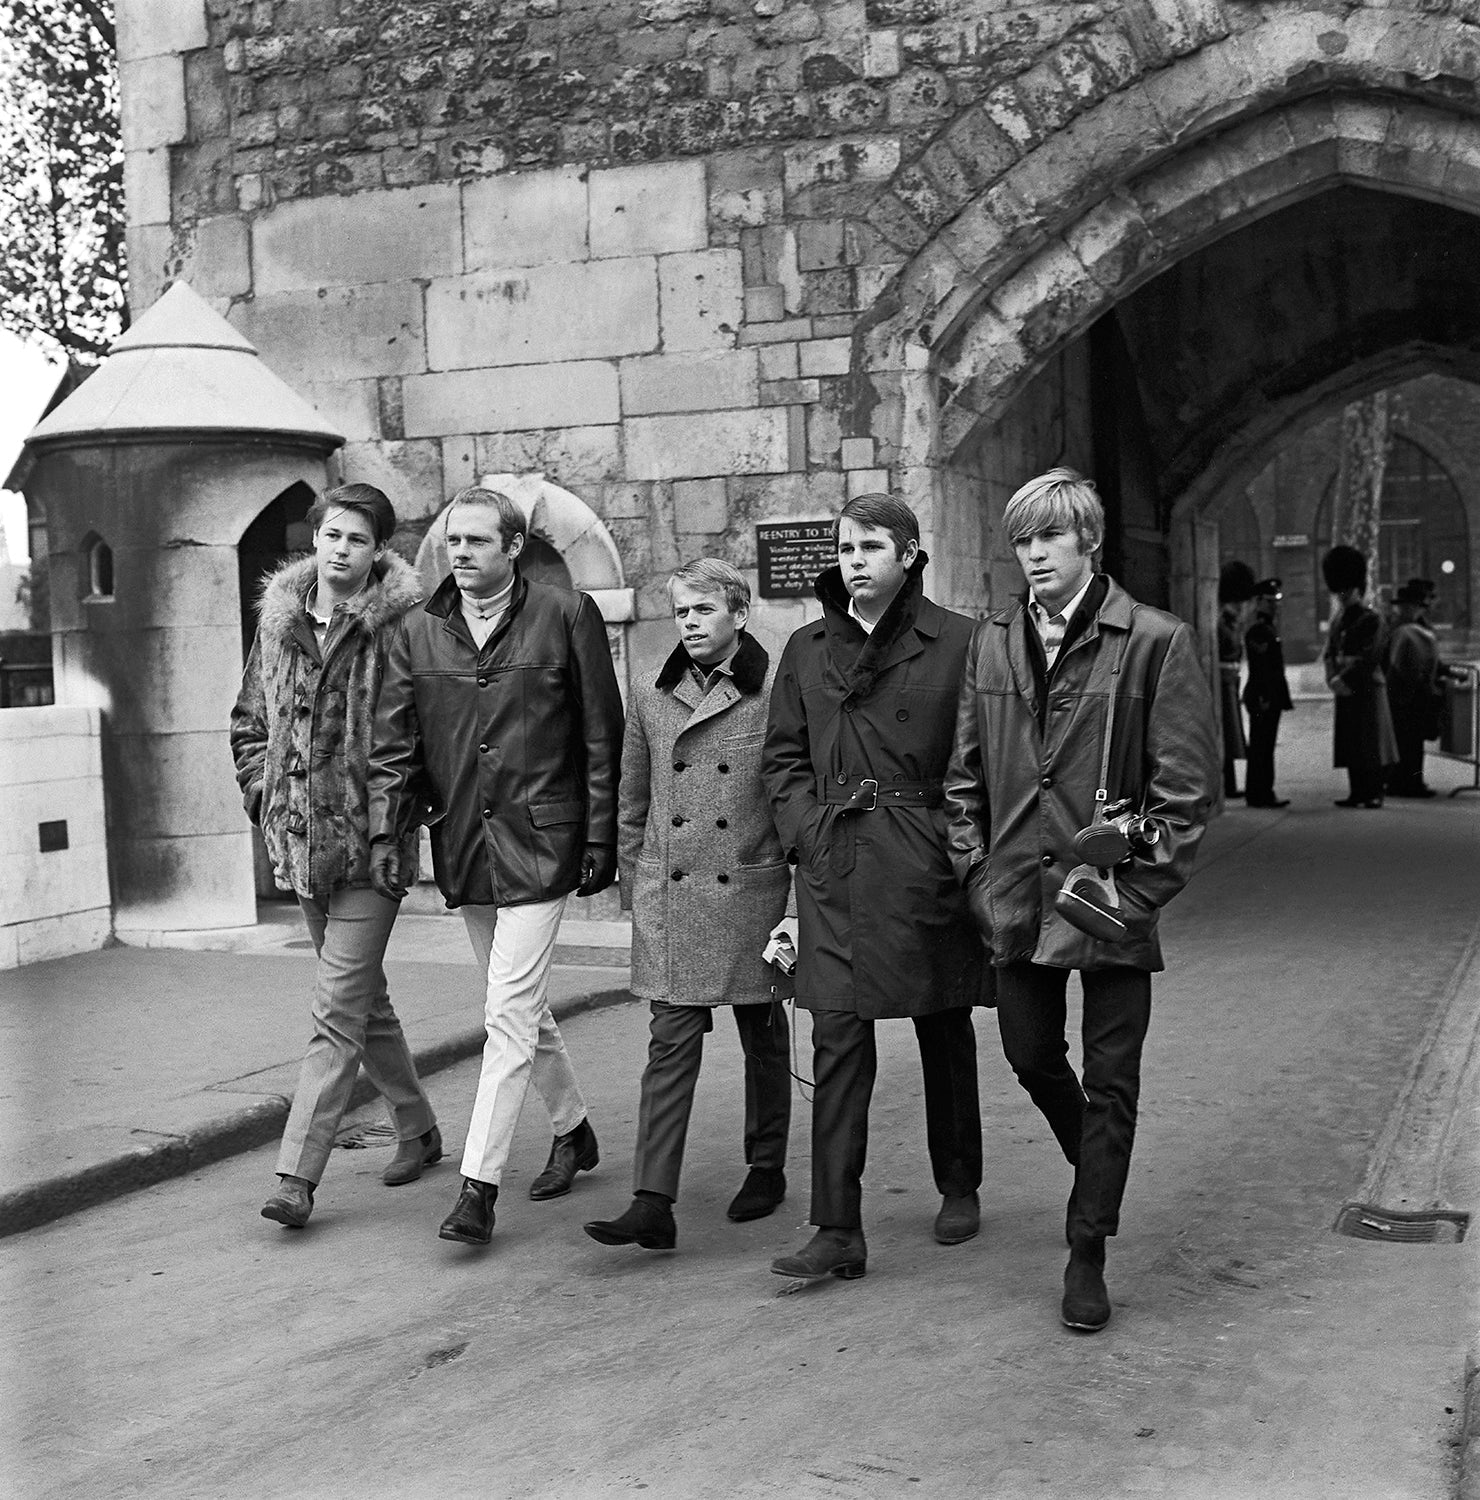 The Beach Boys in London - Leaving the tower - Morrison Hotel Gallery